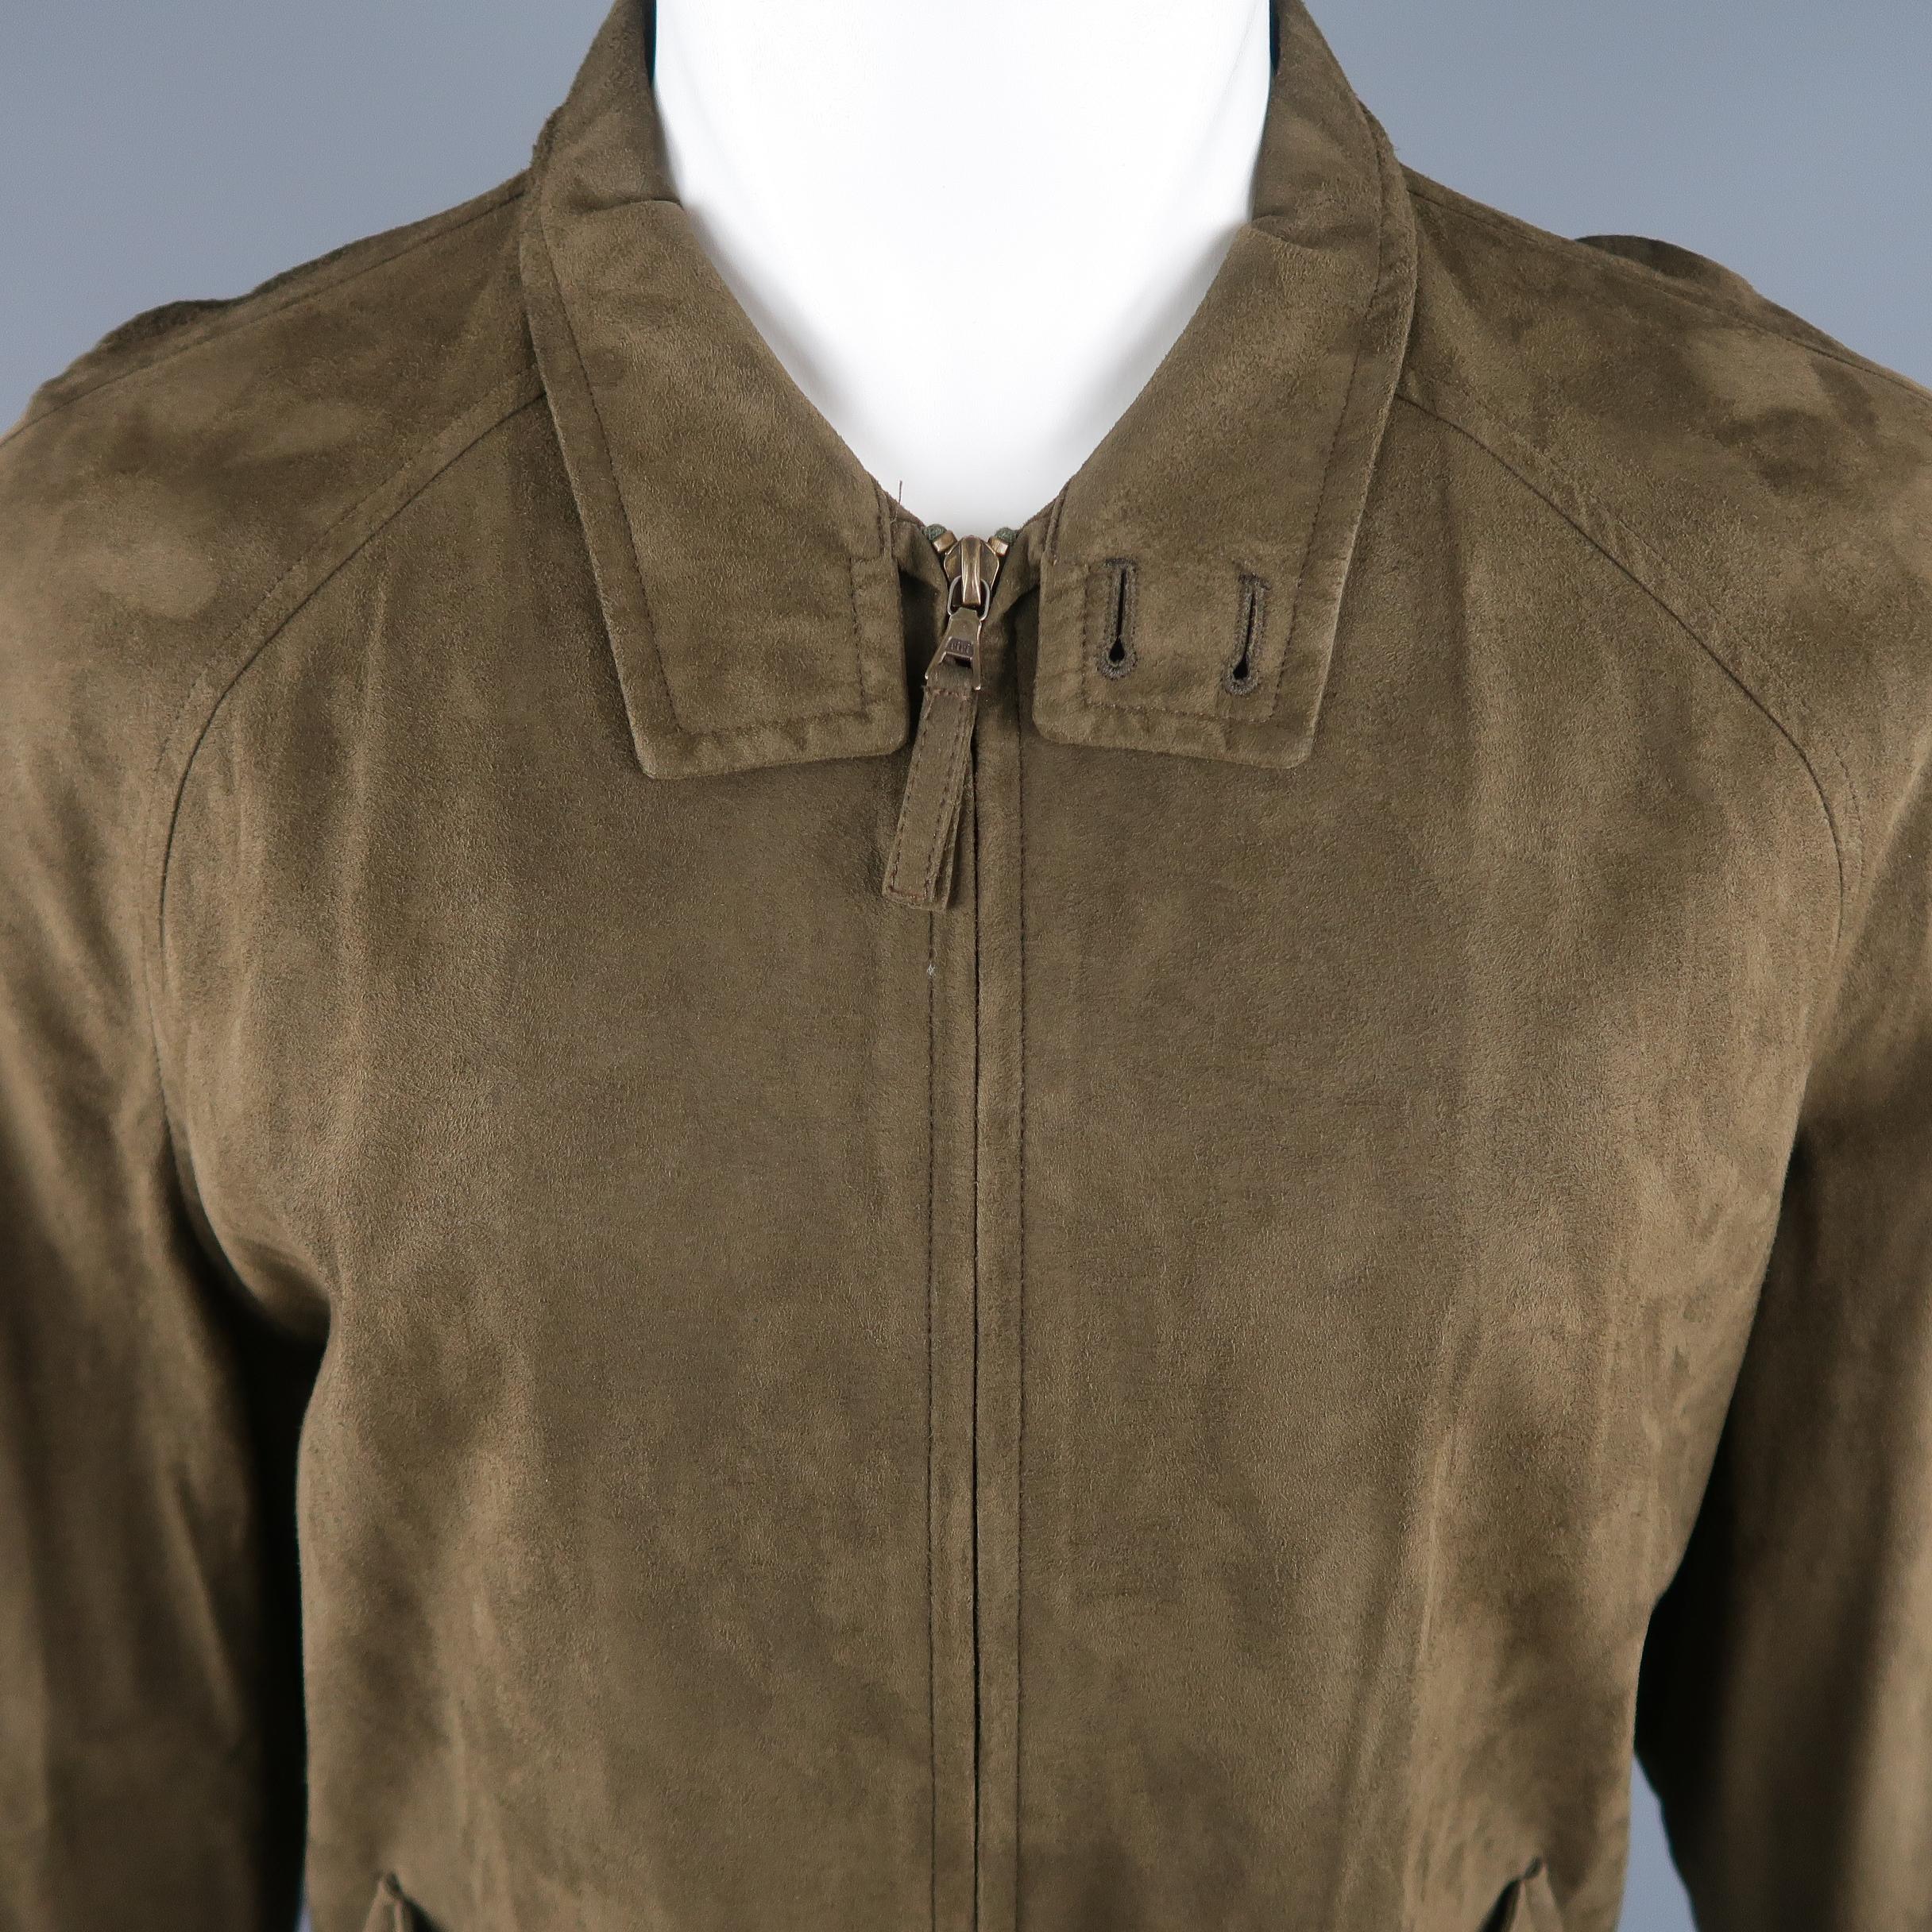 ERMENEGILDO ZEGNA jacket come in olive solid polyamide faux suede, with buttoned collar, zip up and buttoned flap pockets. Coat hanger marks on the shoulders. Made in Italy.
 
Good Pre-Owned Condition.
Marked: M / 50
 
Measurements:
 
Shoulder: 17.5